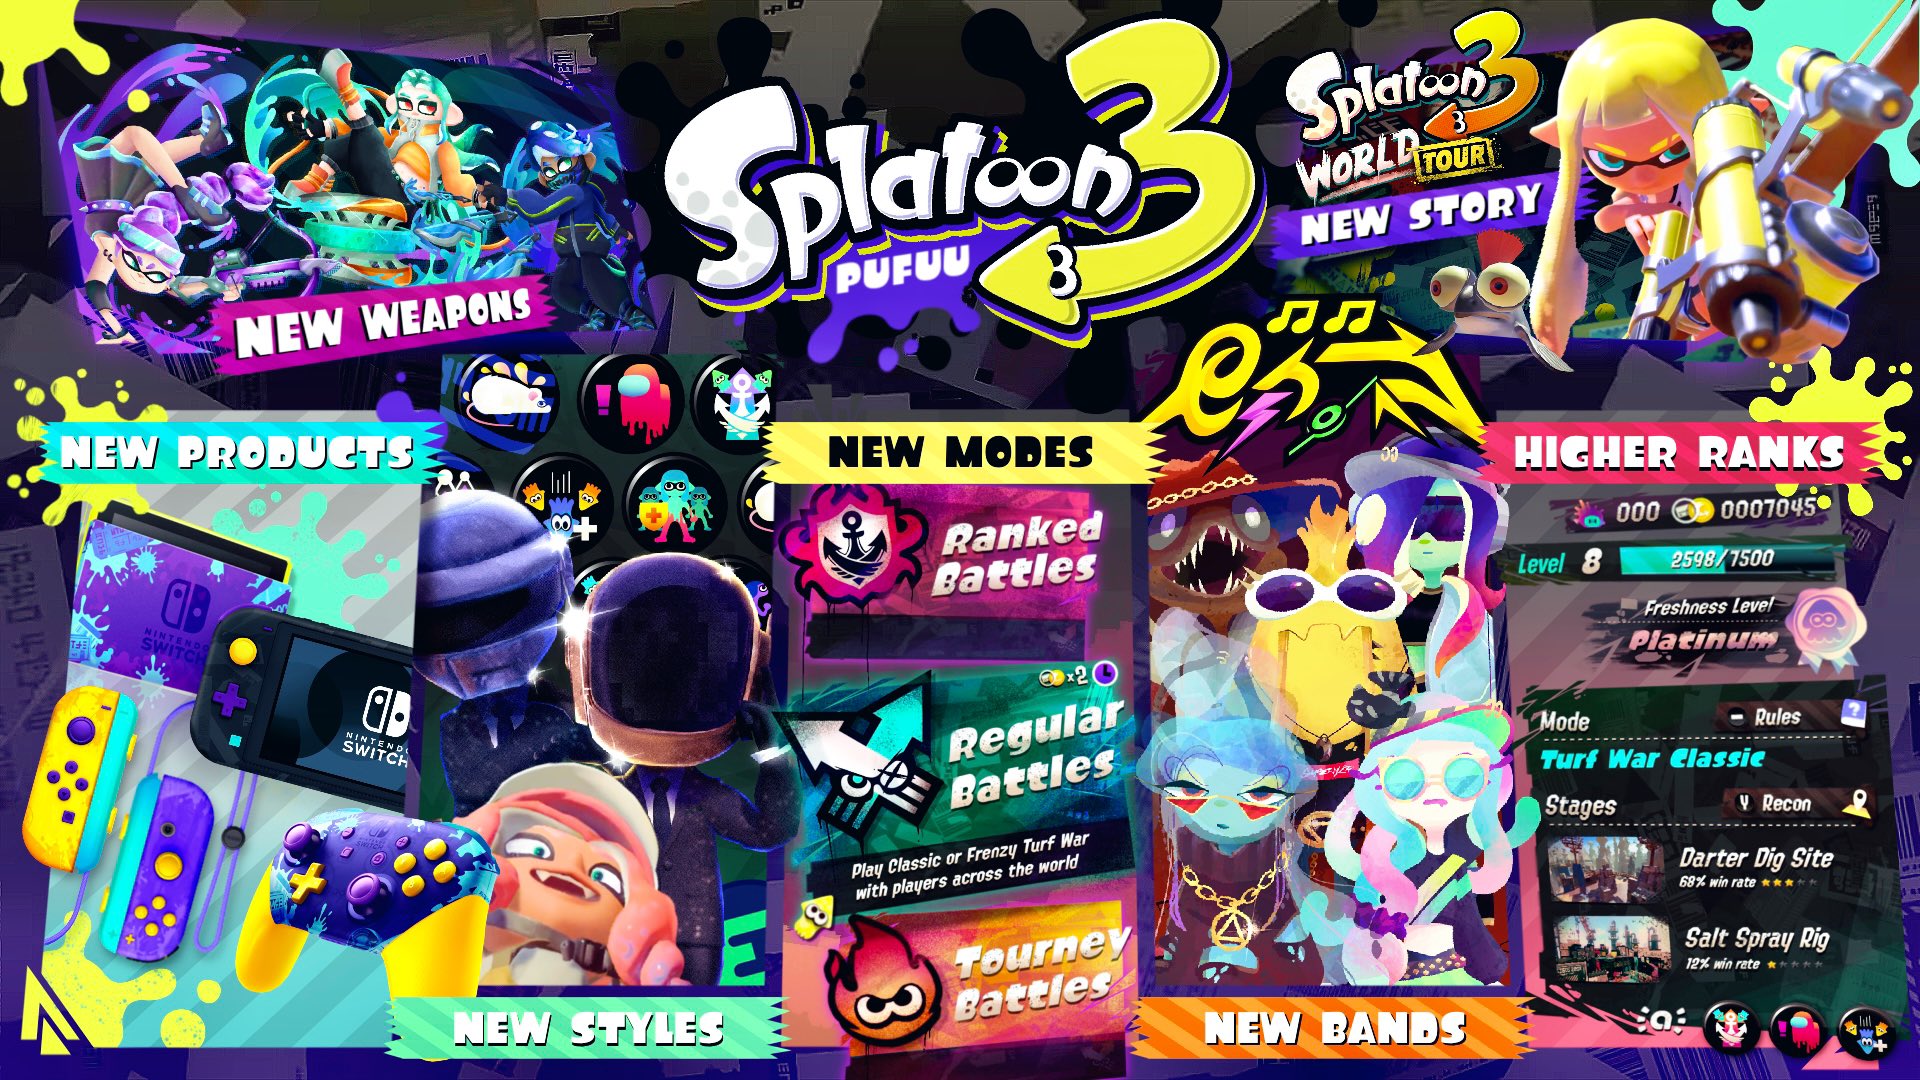 Pufuu Splatoon 3 Fan Edition Concept Checklist A New Project Challenge Covering All Aspects Of Splatoon Will I Be Able To Finish Before The Game Comes Out Splatoon スプラトゥーン